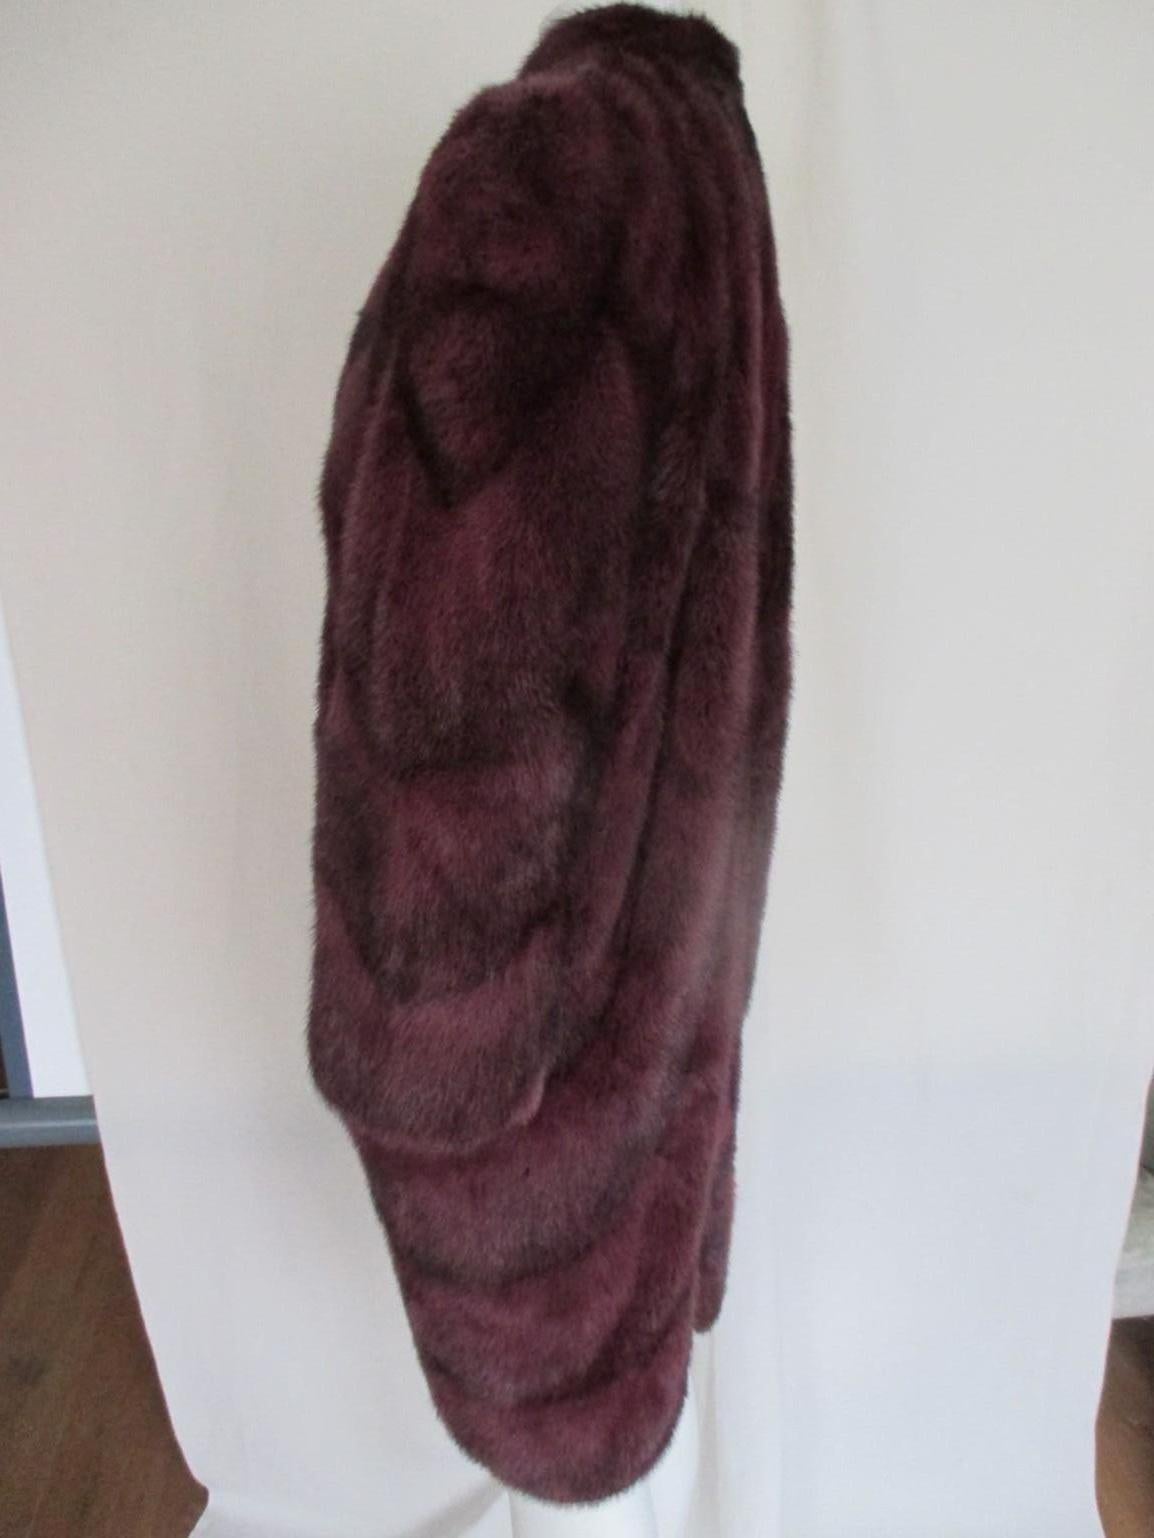 We offer more exclusive fur items, view our frontstore

This vintage flared 3/4 length dyed burgundy mink coat is made of soft quality fur with 4 closing hooks, 2 pockets, inside pocket and a split at the back.
Pre-loved condition with some wear of